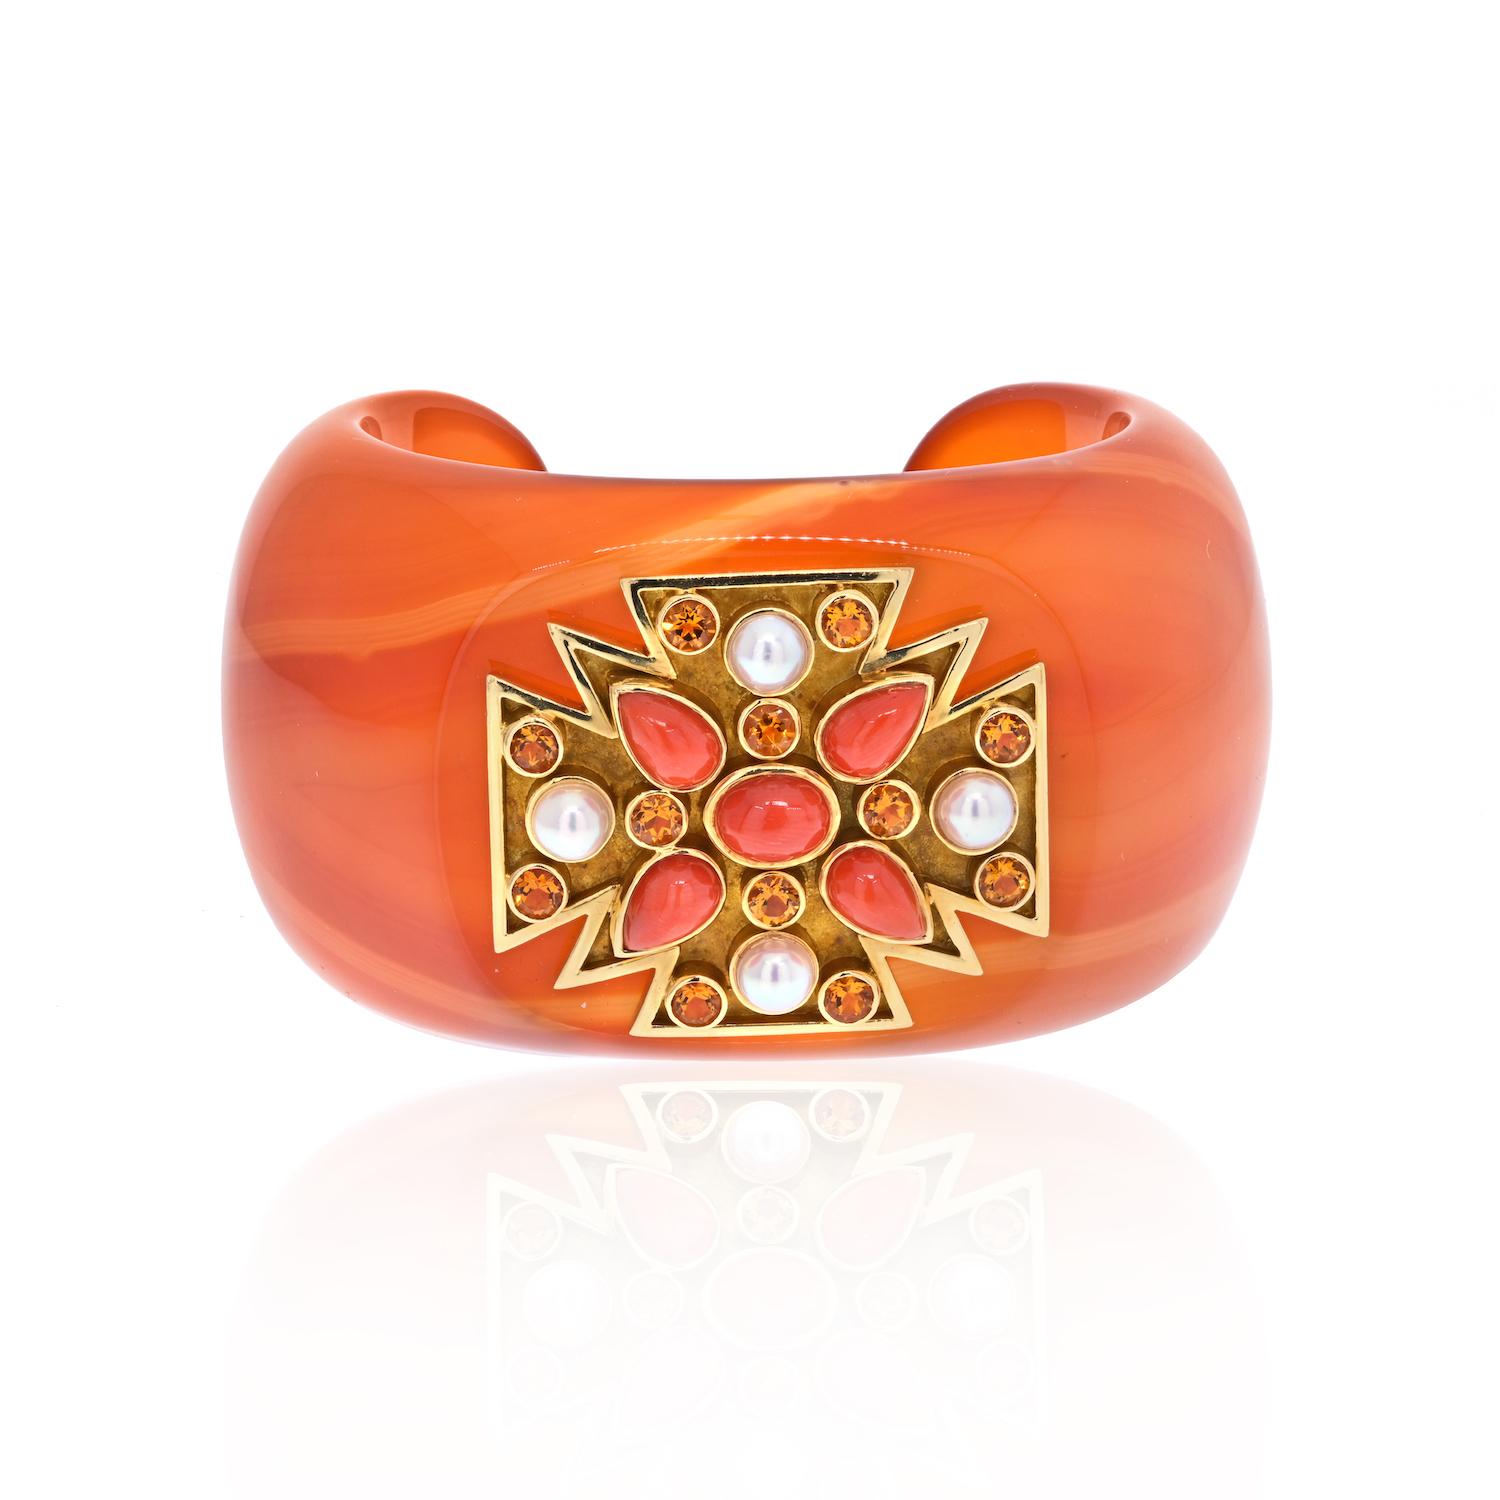 Verdura 18K Yellow Gold Carved Agate, Coral, Pearl Bracelet.
Verdura carved agate Maltese cross cuff set with coral, pearl diamonds, and round brilliant citrines. Originally designed for Coco Chanel, Verdura's cuffs are as bold and stylish today as